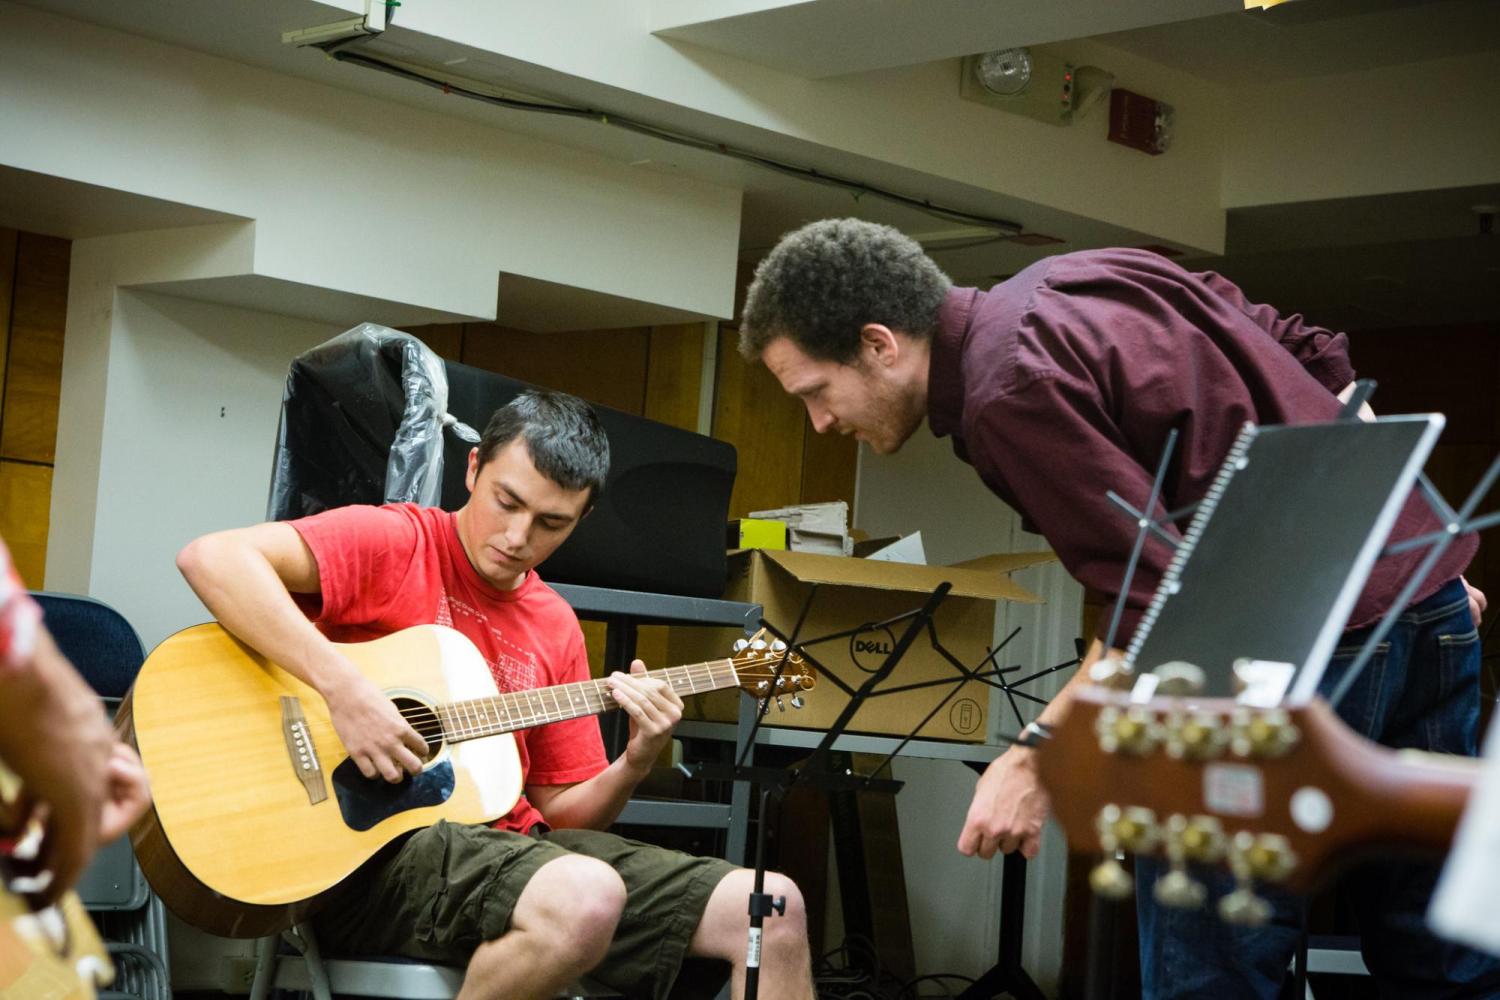 A student receives feedback on his guitar playing from his instructor